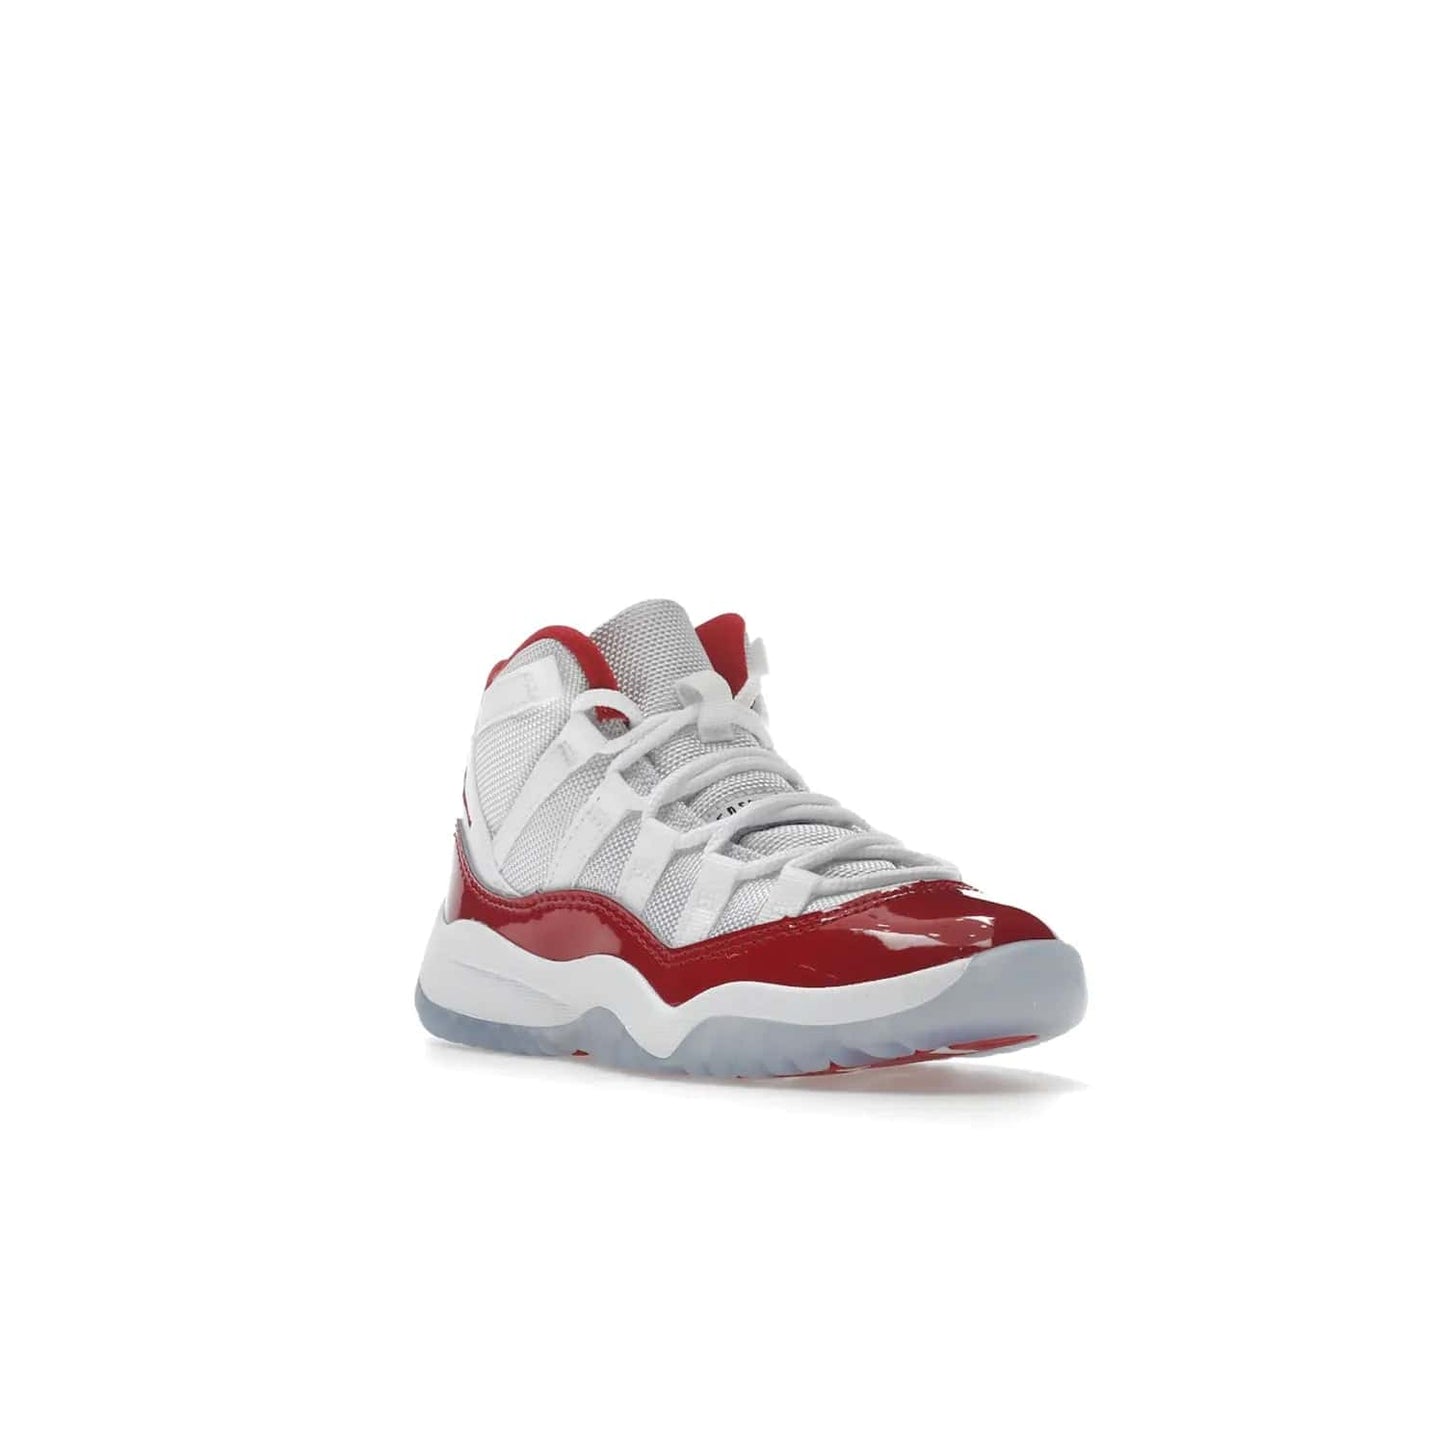 Jordan 11 Retro Cherry (2022) (PS) - Image 6 - Only at www.BallersClubKickz.com - An iconic silhouette with a timeless look, the Air Jordan 11 Retro Cherry 2022 PS features a crisp White, Varsity Red and Black colorway. The upper is made of ballistic mesh, a red patent leather mudguard, '23' branding and white Phylon midsole. Get optimal cushioning and comfort on December 10th, 2022. Don't miss out.